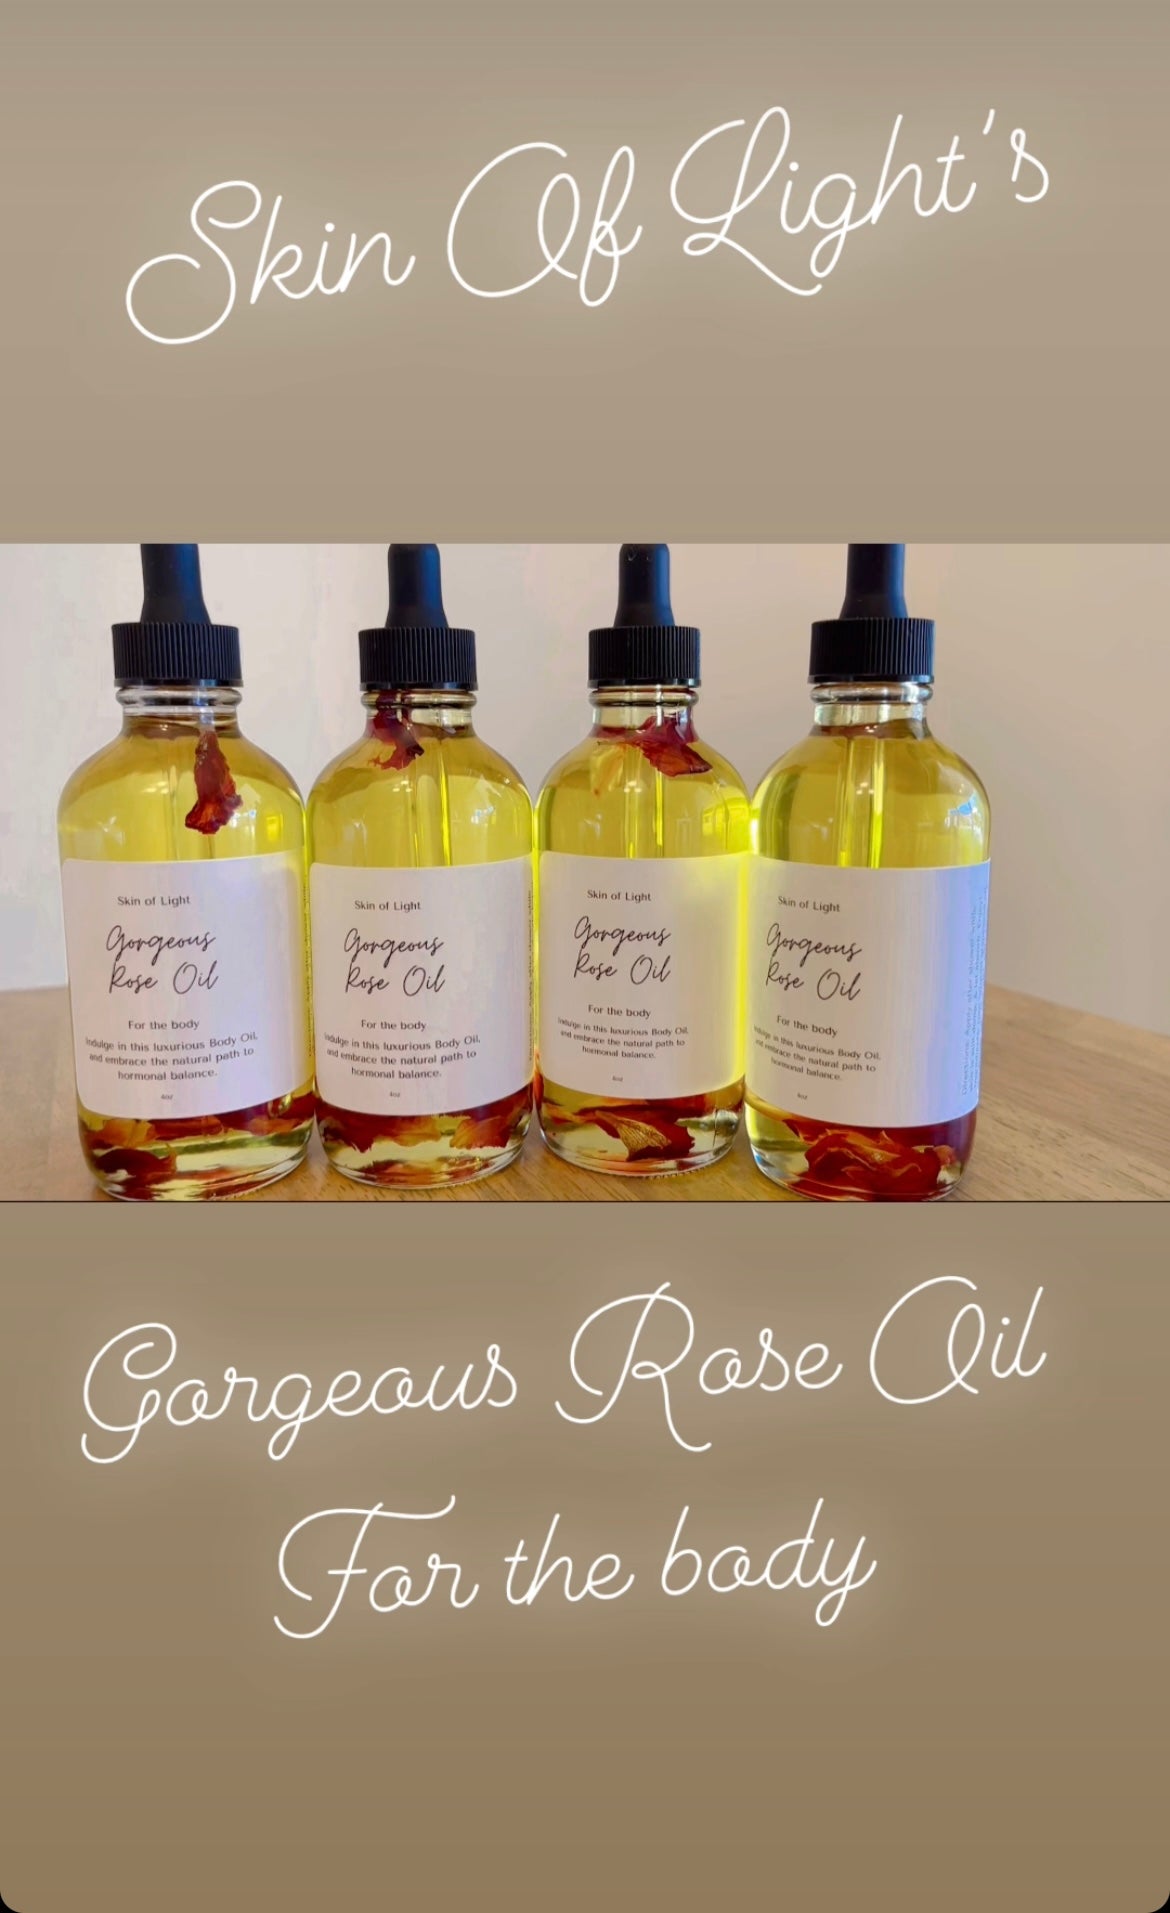 Gorgeous Rose Oil for the body